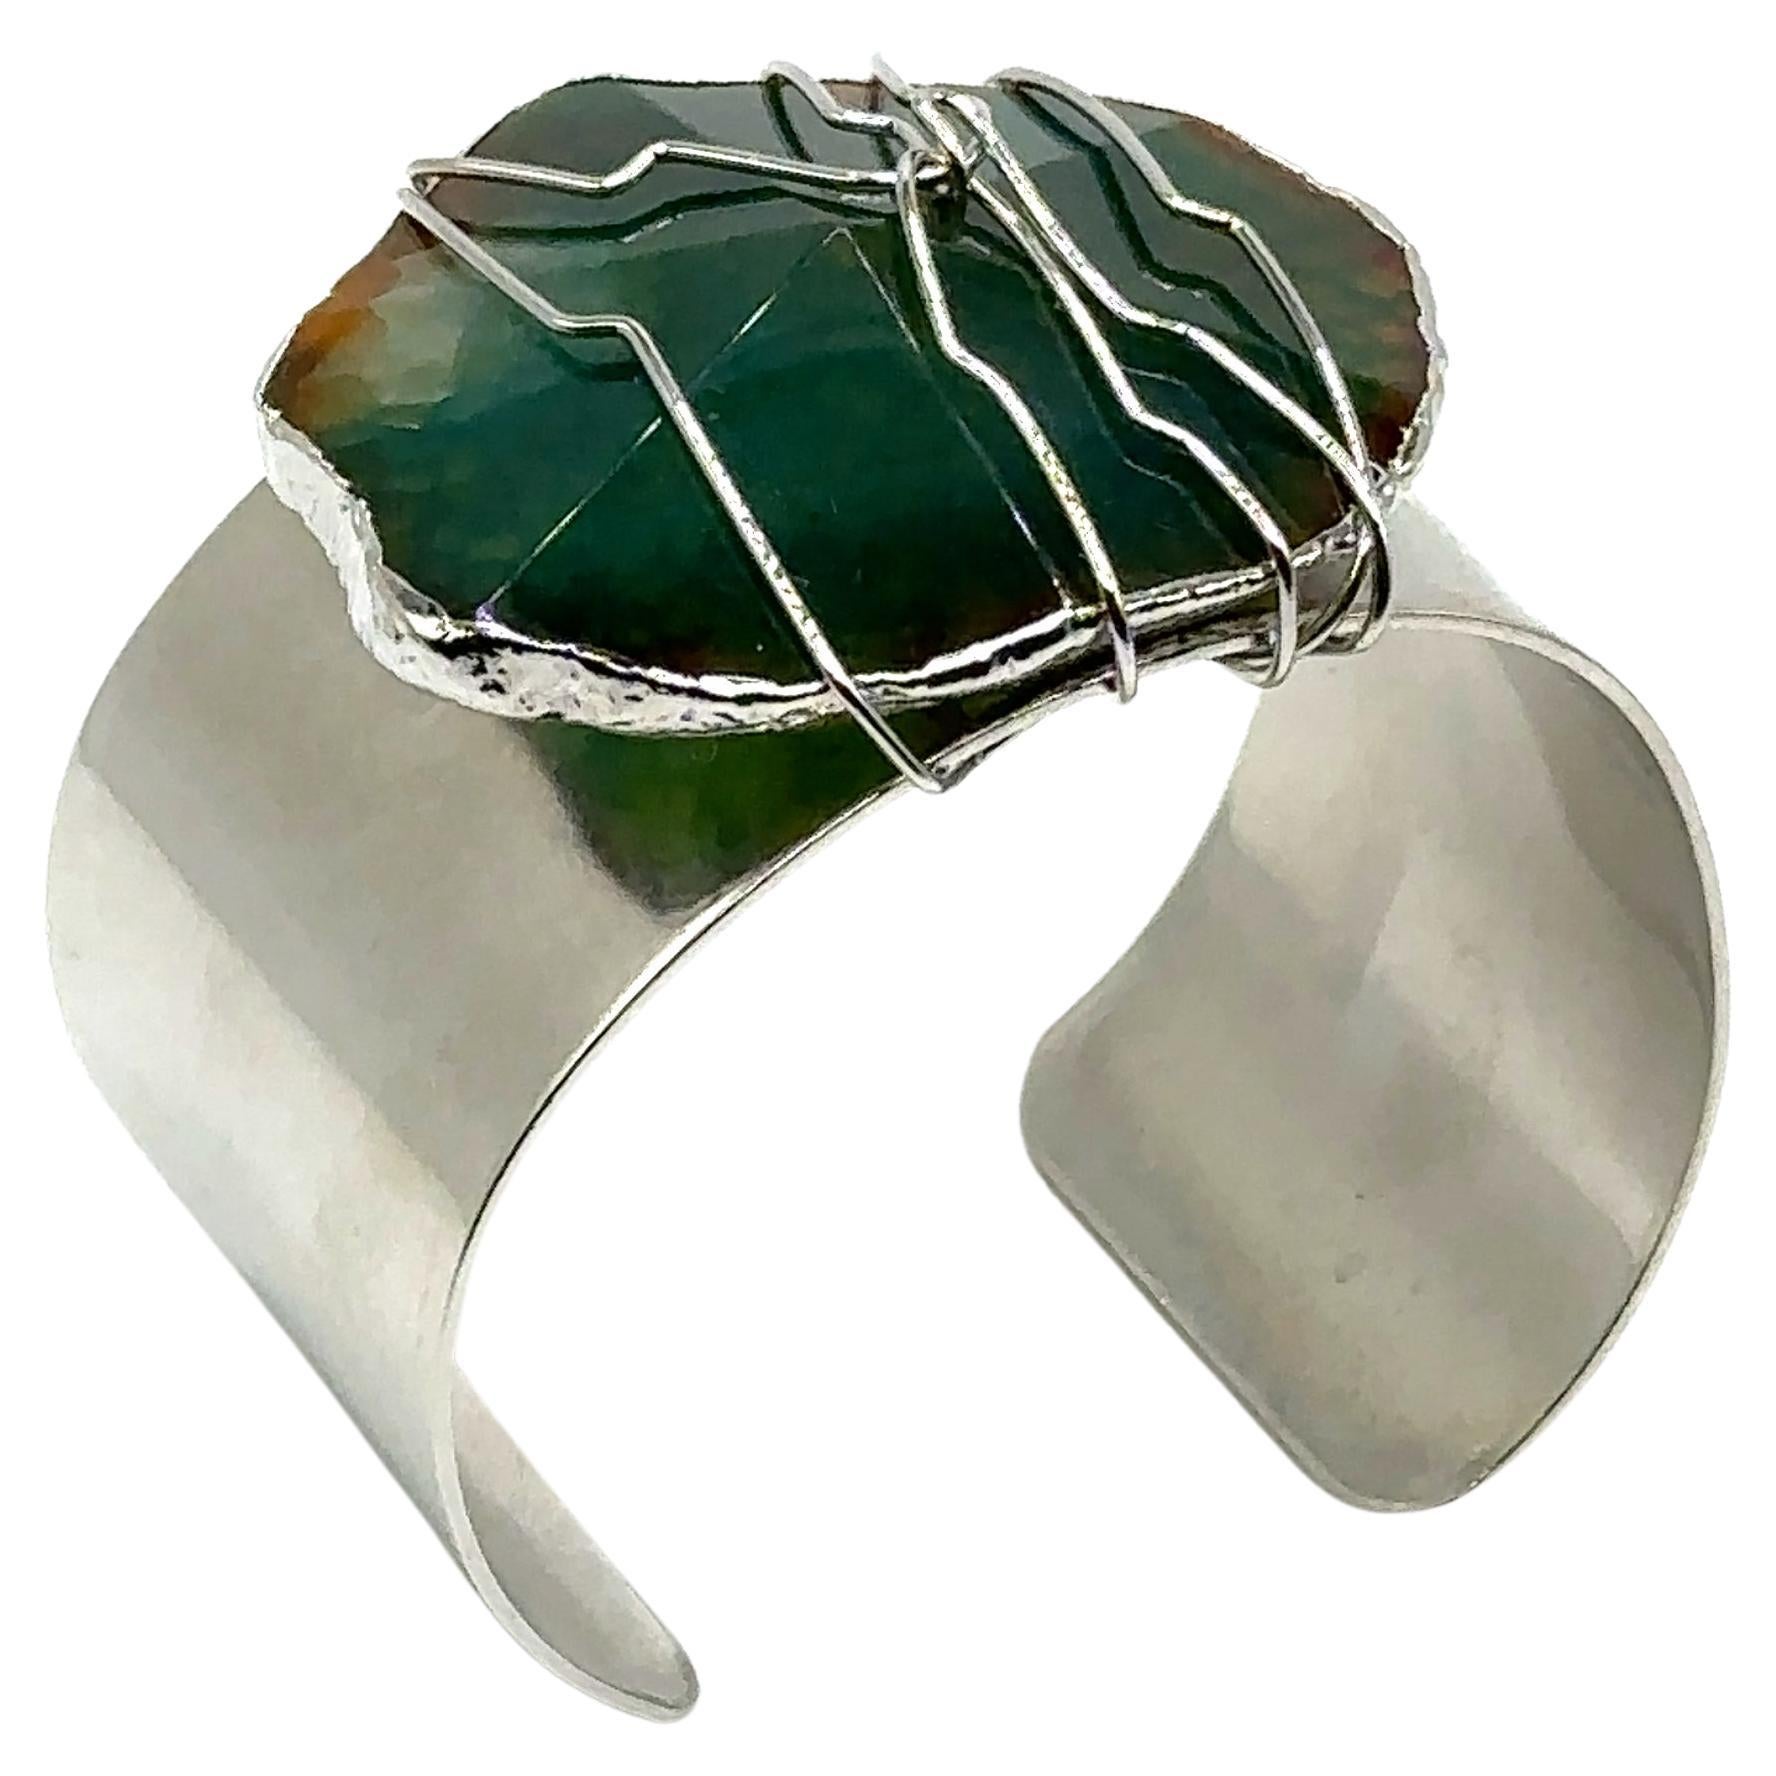 Bailey - Bracelet cuff white rhodium plated with green agate